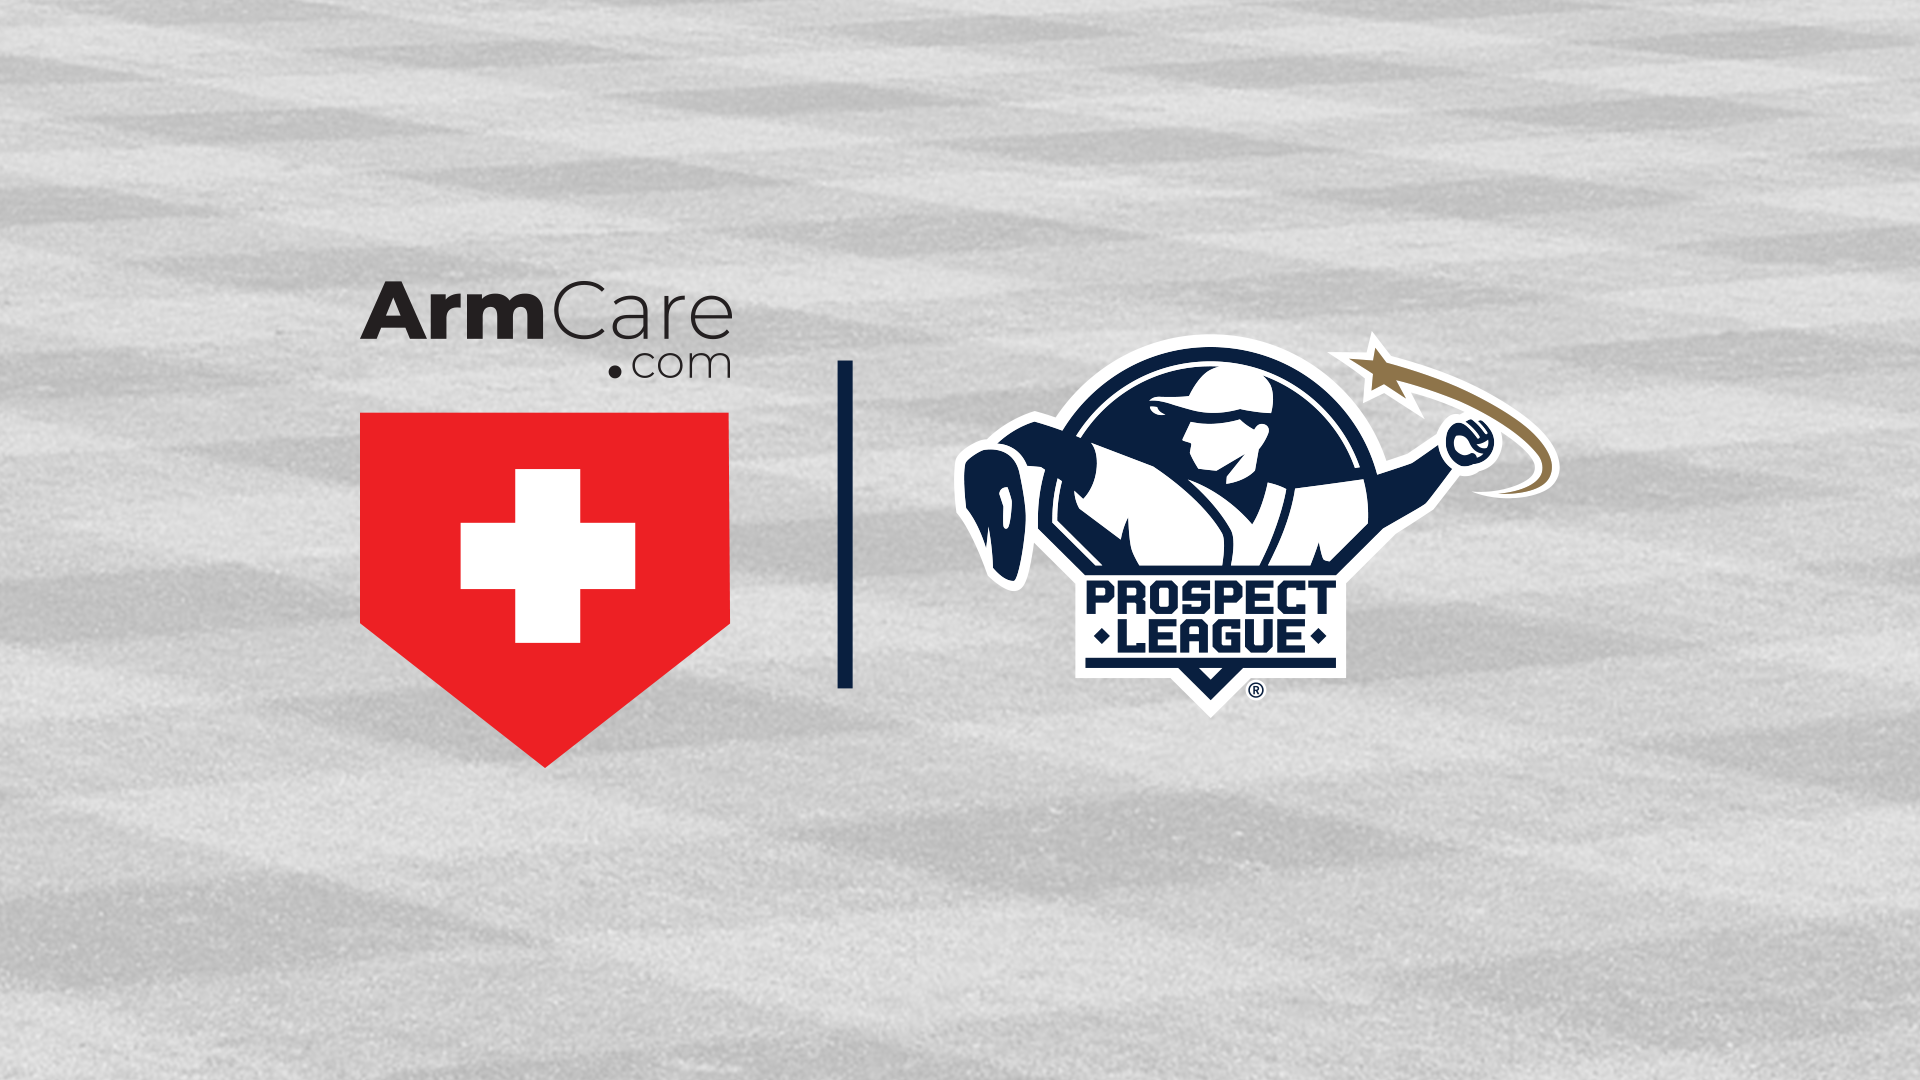 Prospect League Partners with ArmCare to Deliver Player Health and Performance